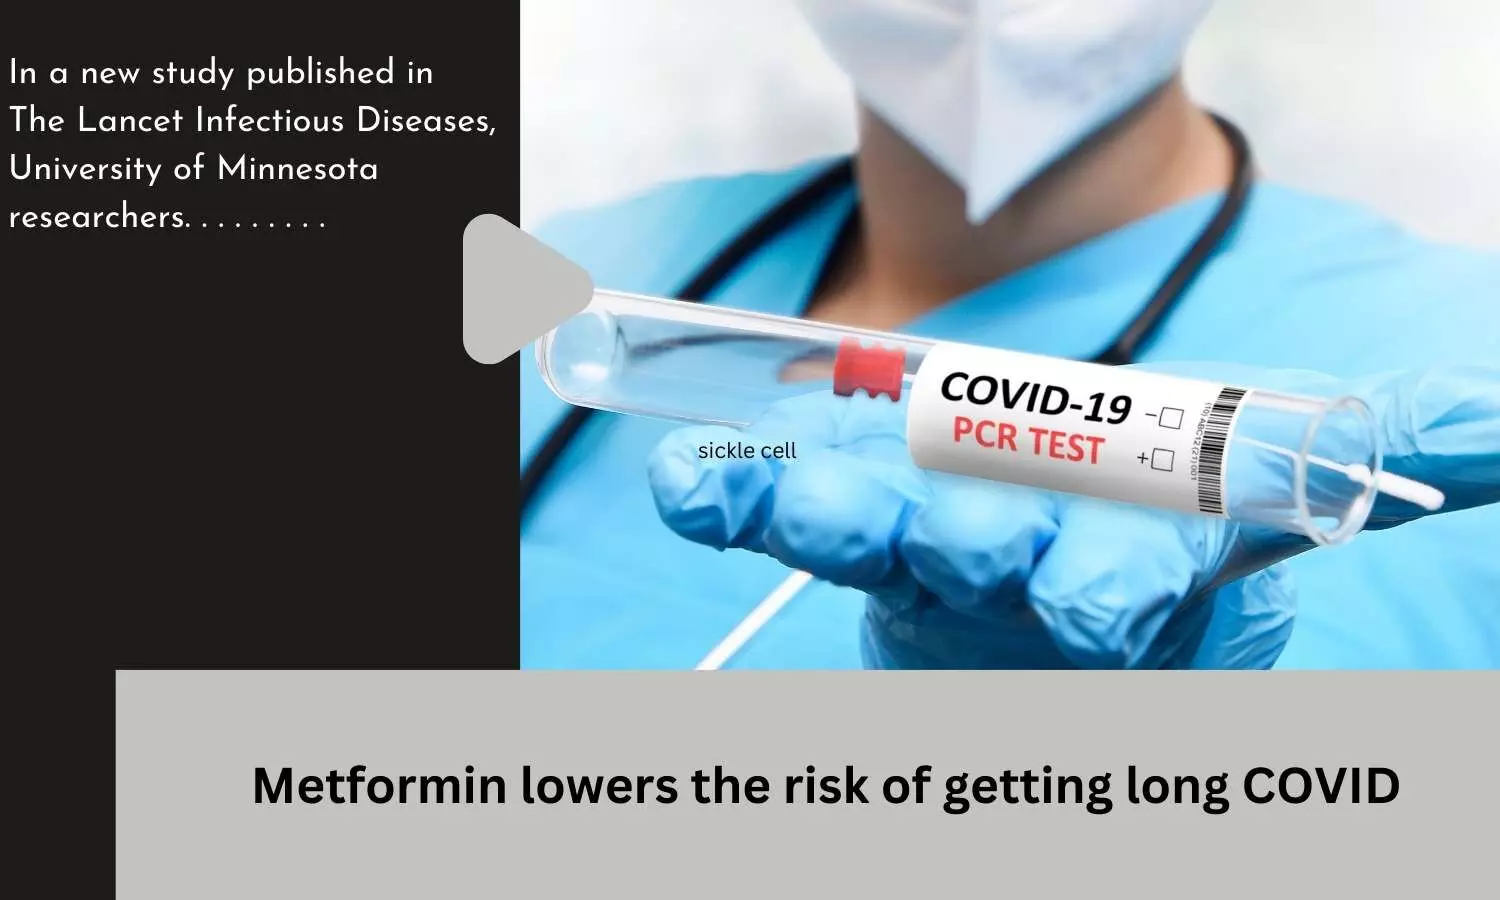 Metformin lowers the risk of getting long COVID